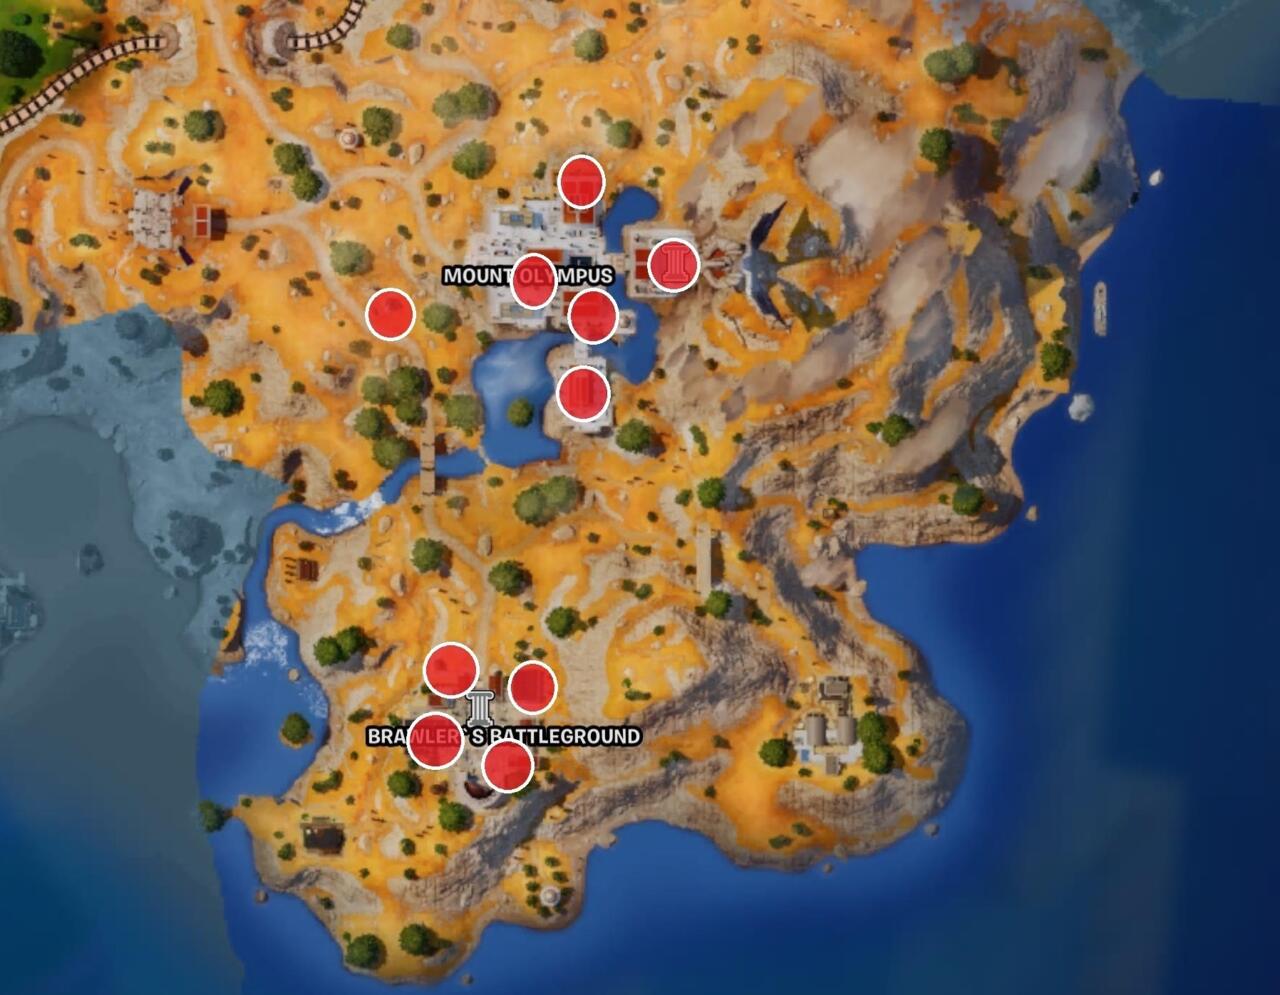 All Olympus Chest locations